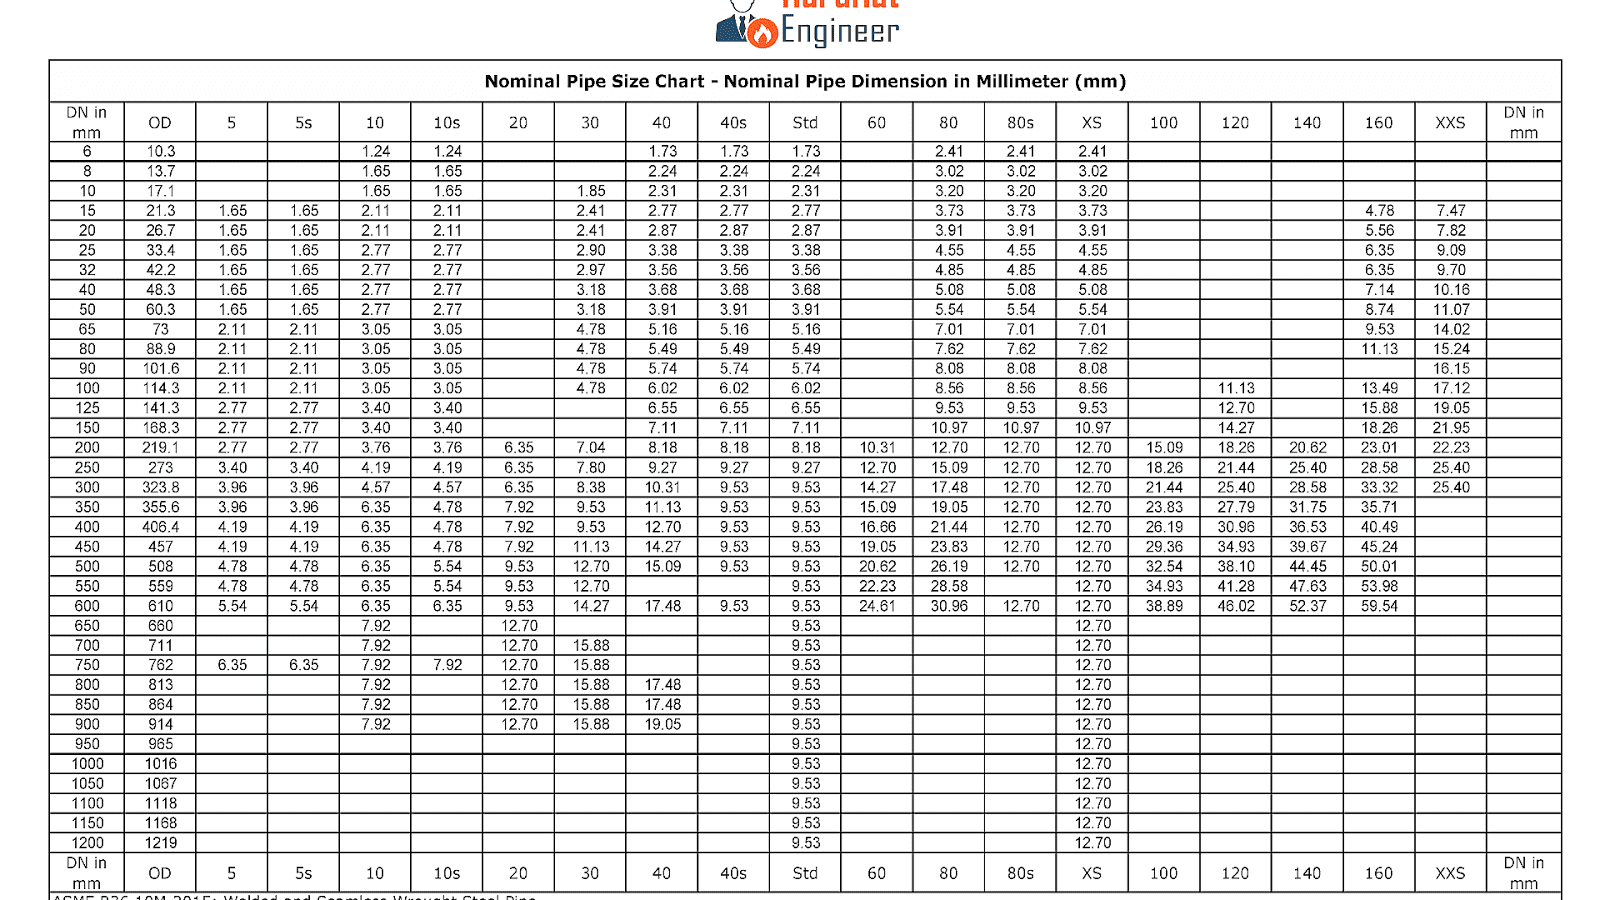 Steel Pipe Dimensions Chart - Steel Choices